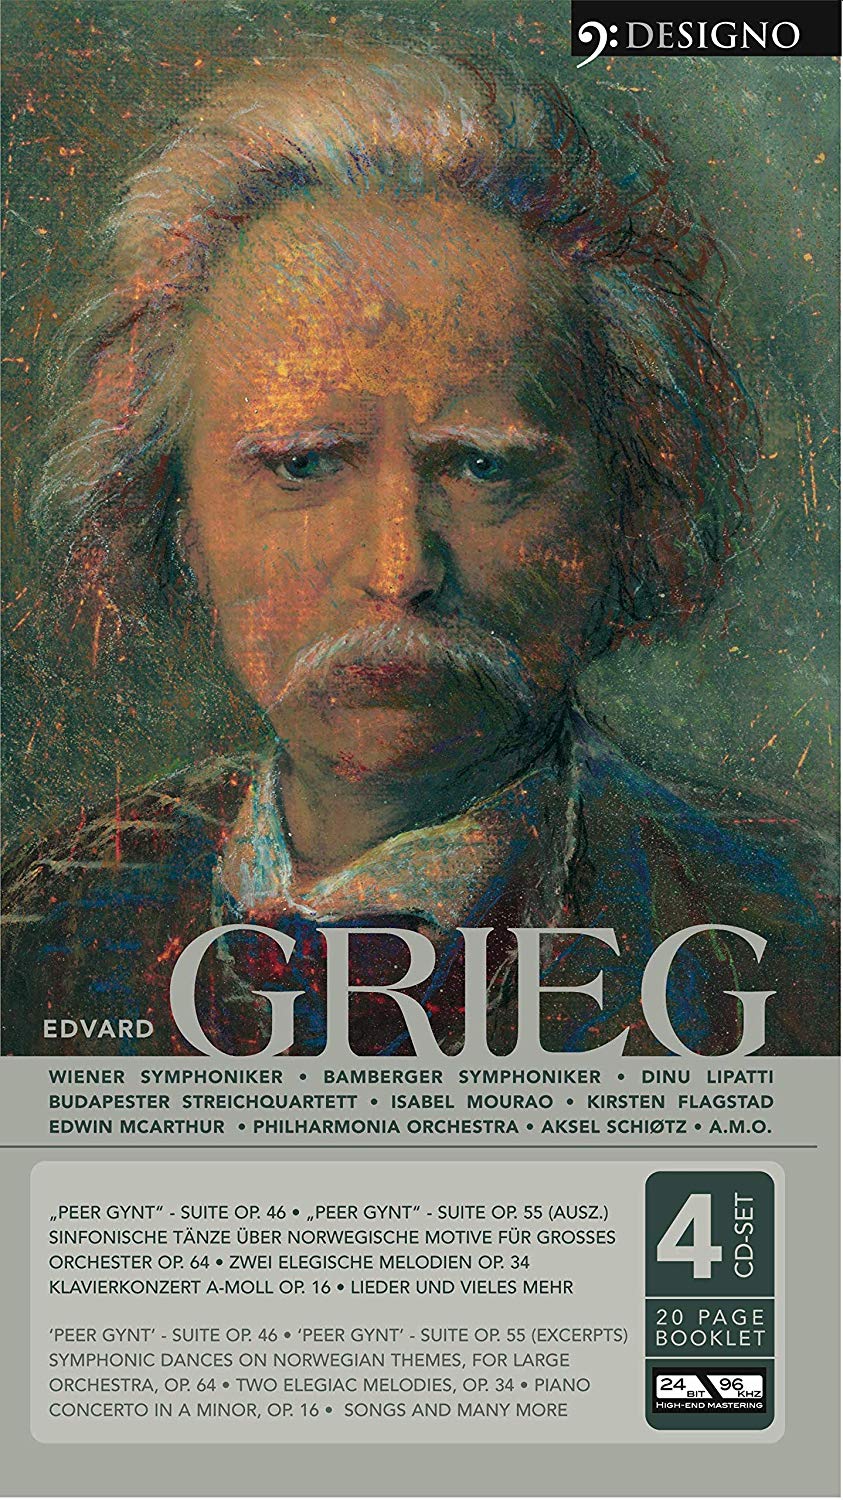 GRIEG: ORCHESTRA, VOCAL AND PIANO WORKS (4 CDS)